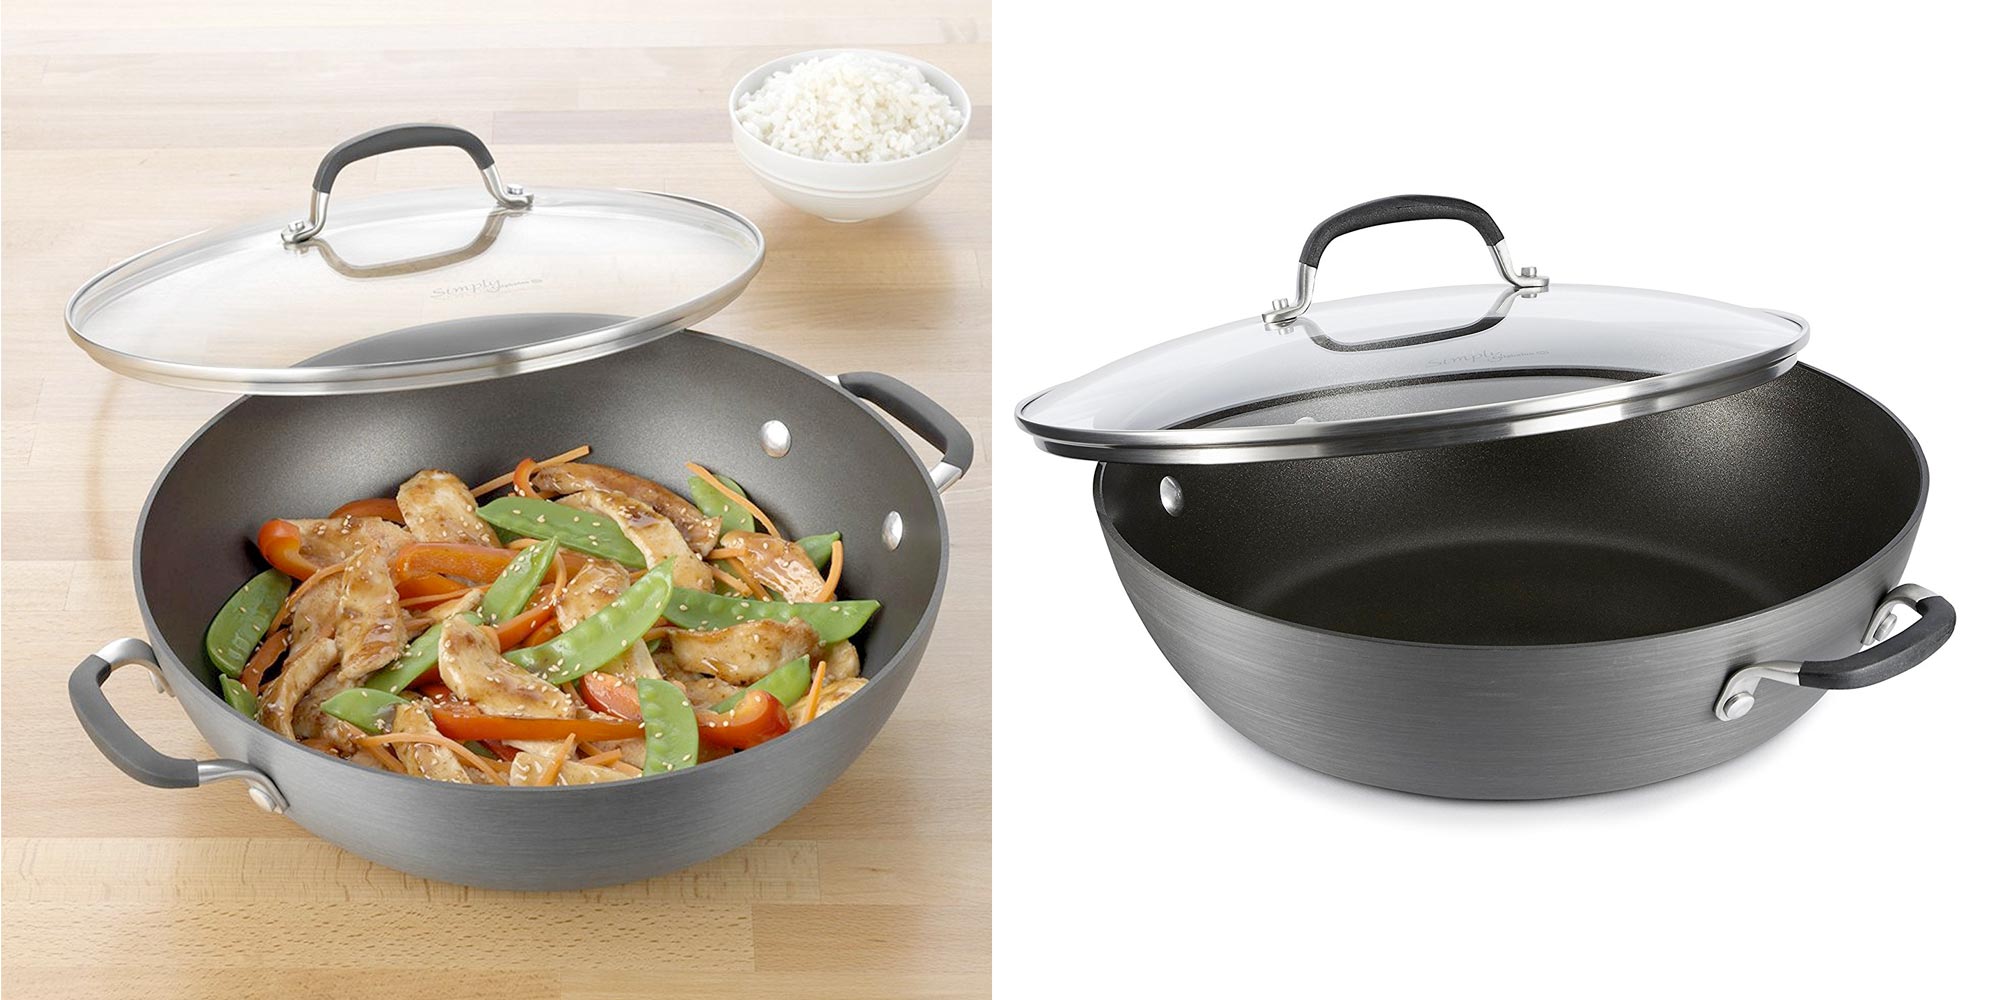 https://9to5toys.com/wp-content/uploads/sites/5/2018/05/simply-calphalon-nonstick-12-inch-all-purpose-pan.jpg